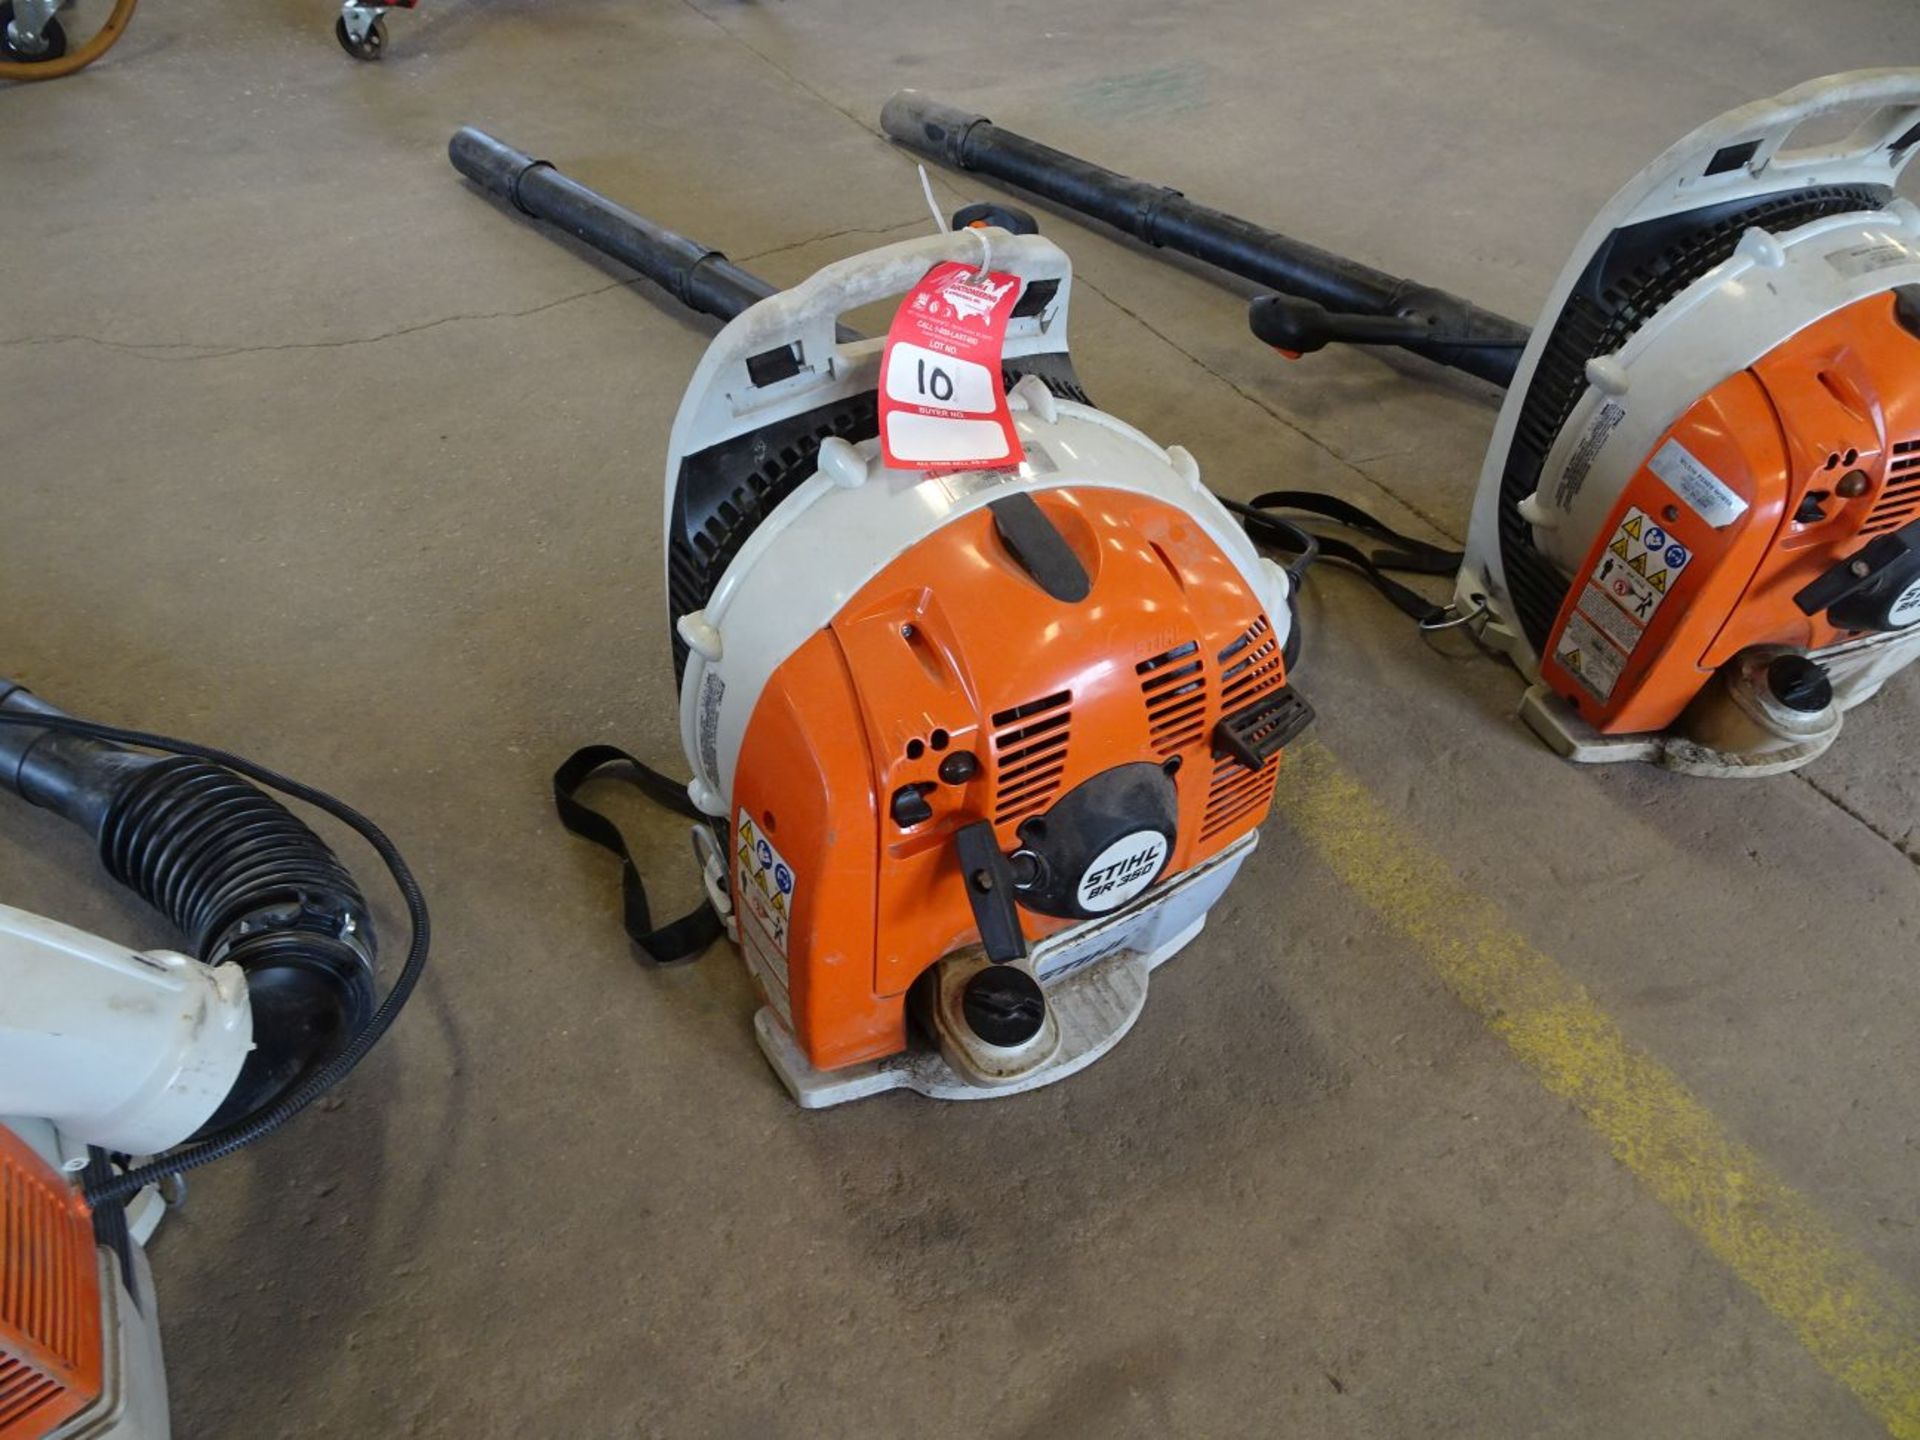 STIHL BR350 GAS POWERED BACKPACK BLOWER (LOCATION: SHOP)